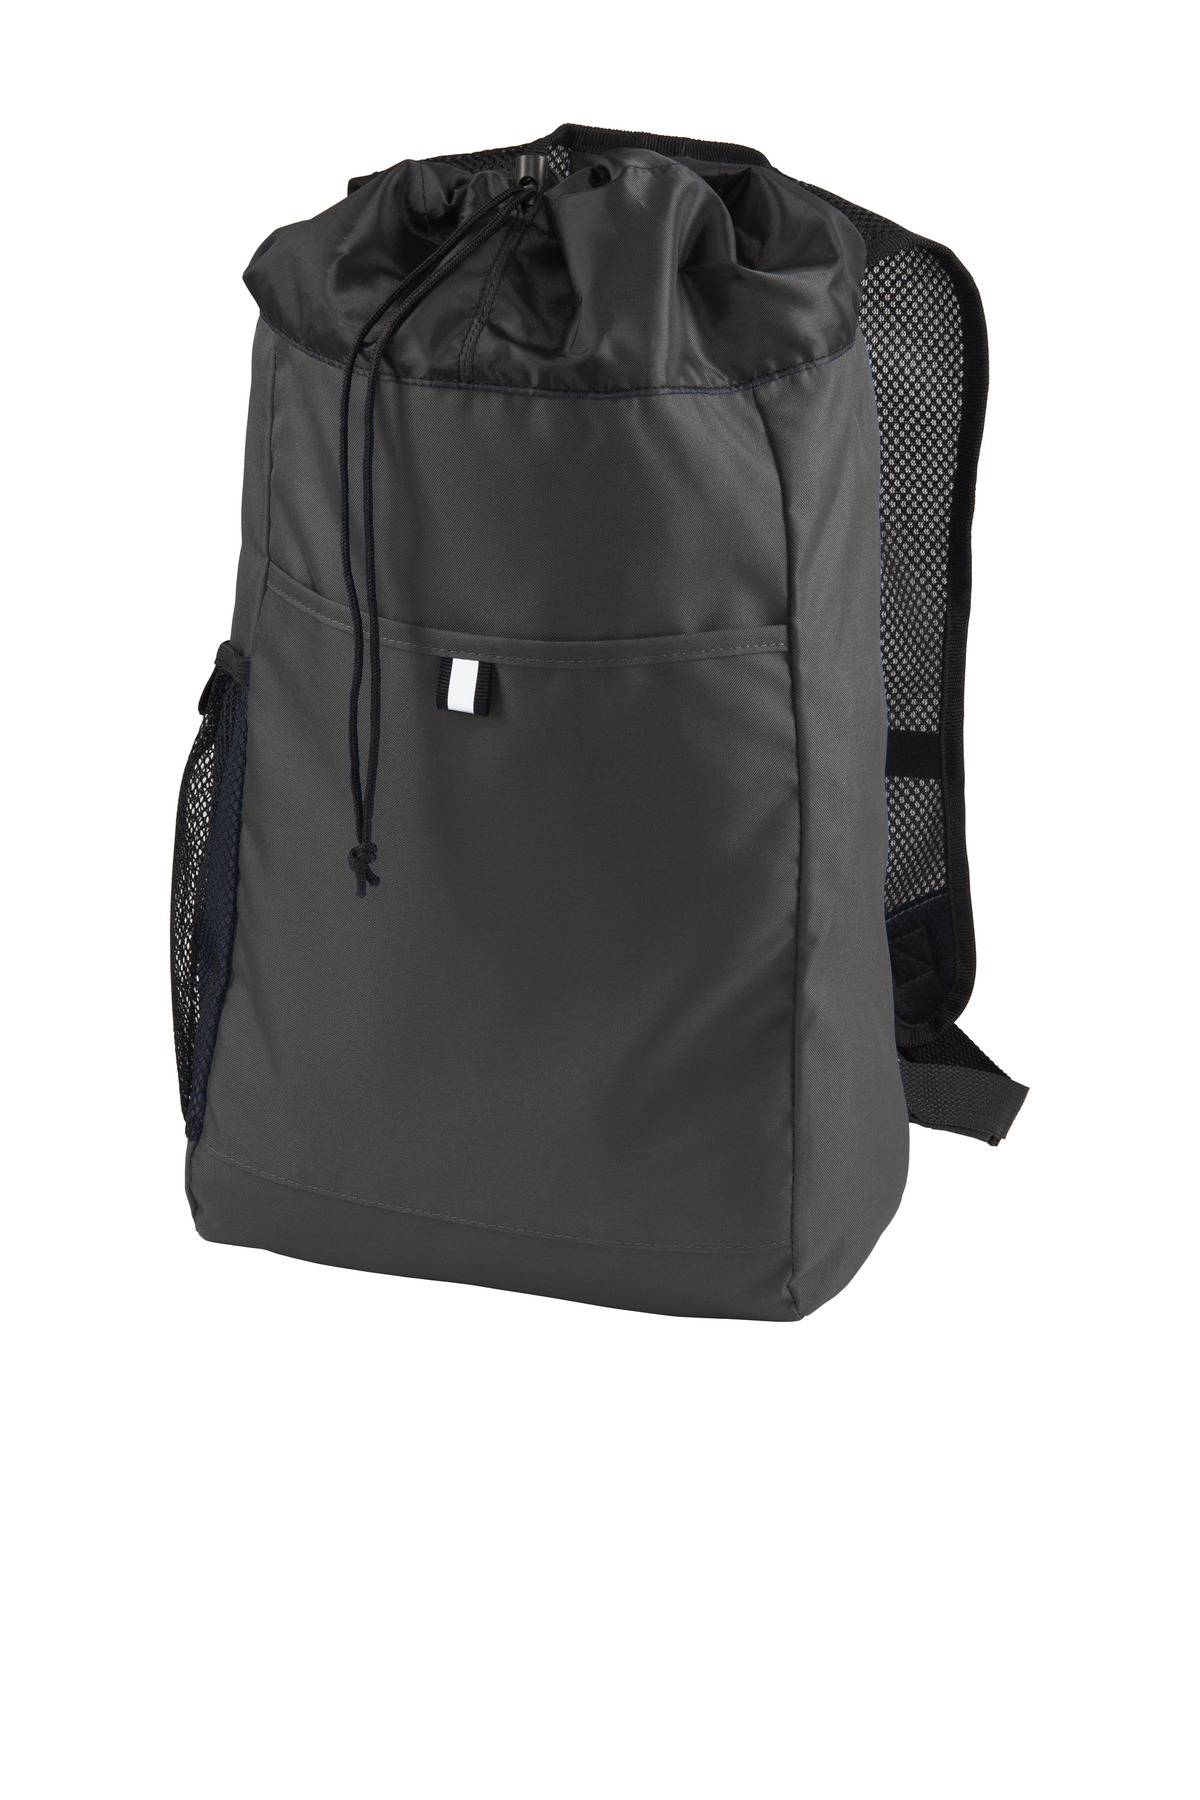 Port Authority Adult Unisex Plain Backpack Dark Char/Blk One Size Fits All - image 1 of 2